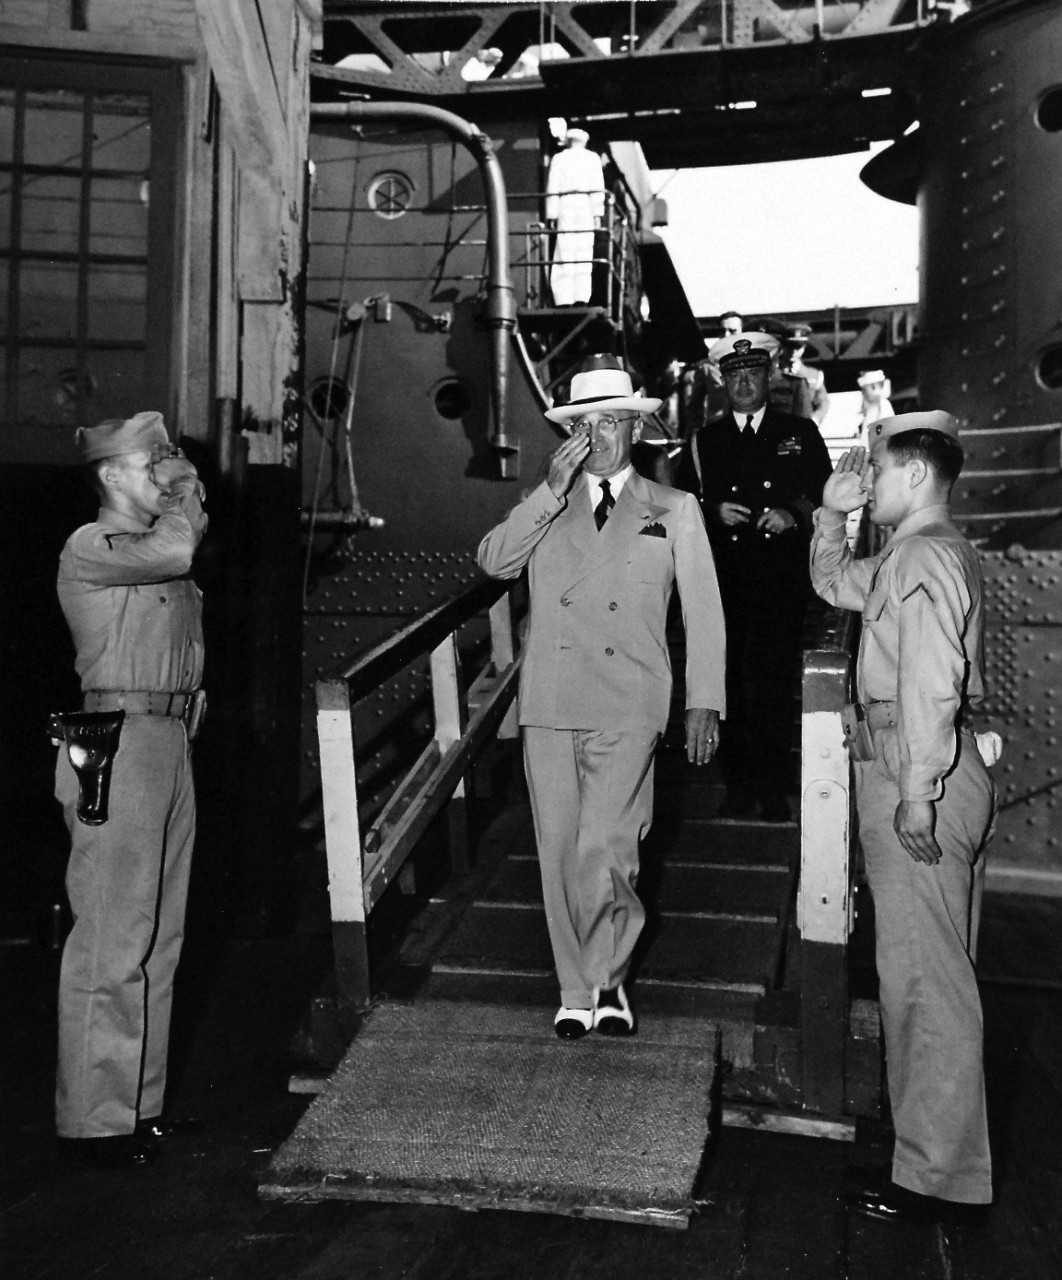 80-G-700364:  Potsdam Conference, July-August 1945.   President Harry S. Truman and his Aide, Captain James K. Vardaman, coming onboard USS Augusta (CA-31) for return voyage from Potsdam Conference.   Photograph released:  August 6, 1945.  Official U.S. Navy photograph, now in the collections of the National Archives.  (2016/06/28).